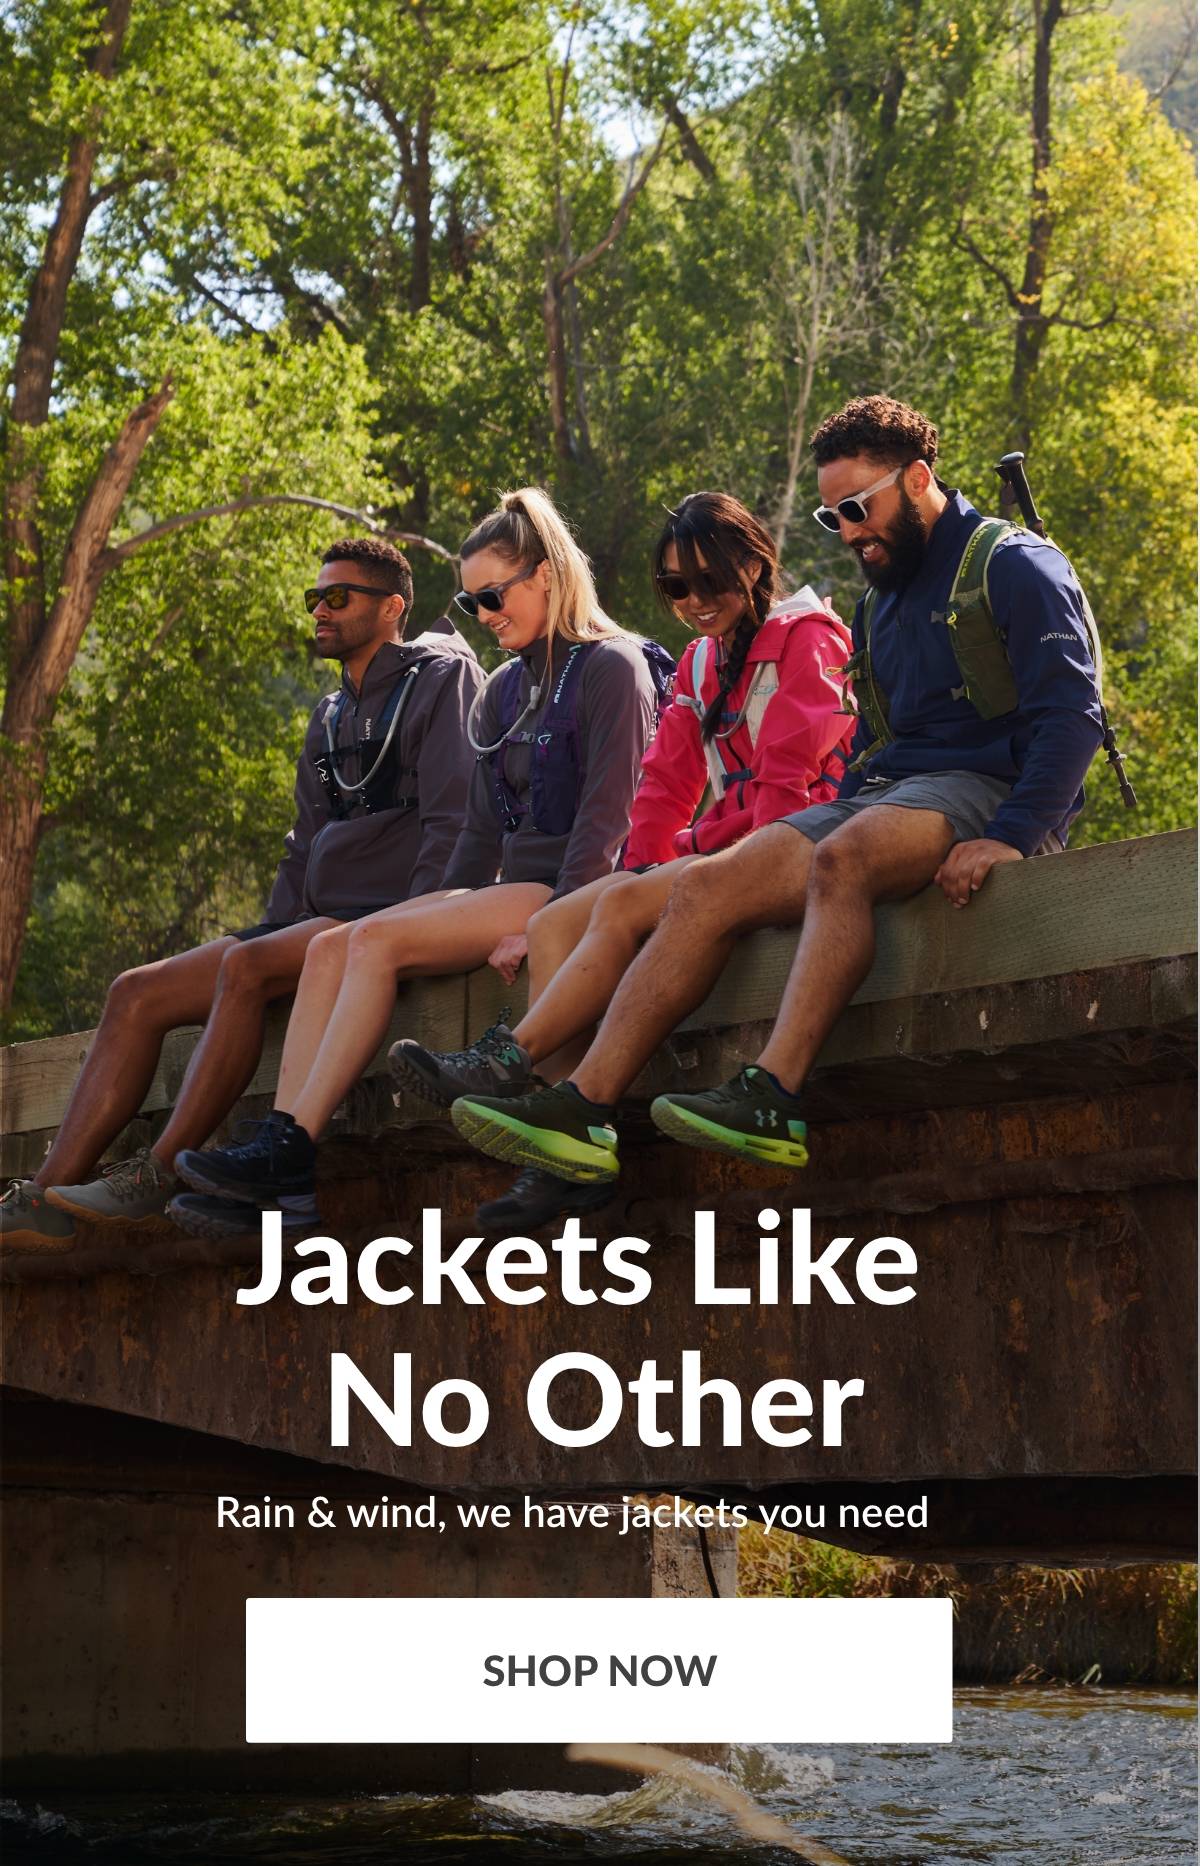 Jackets Like No Other. Rain & wind, we have jackets you need. SHOP NOW